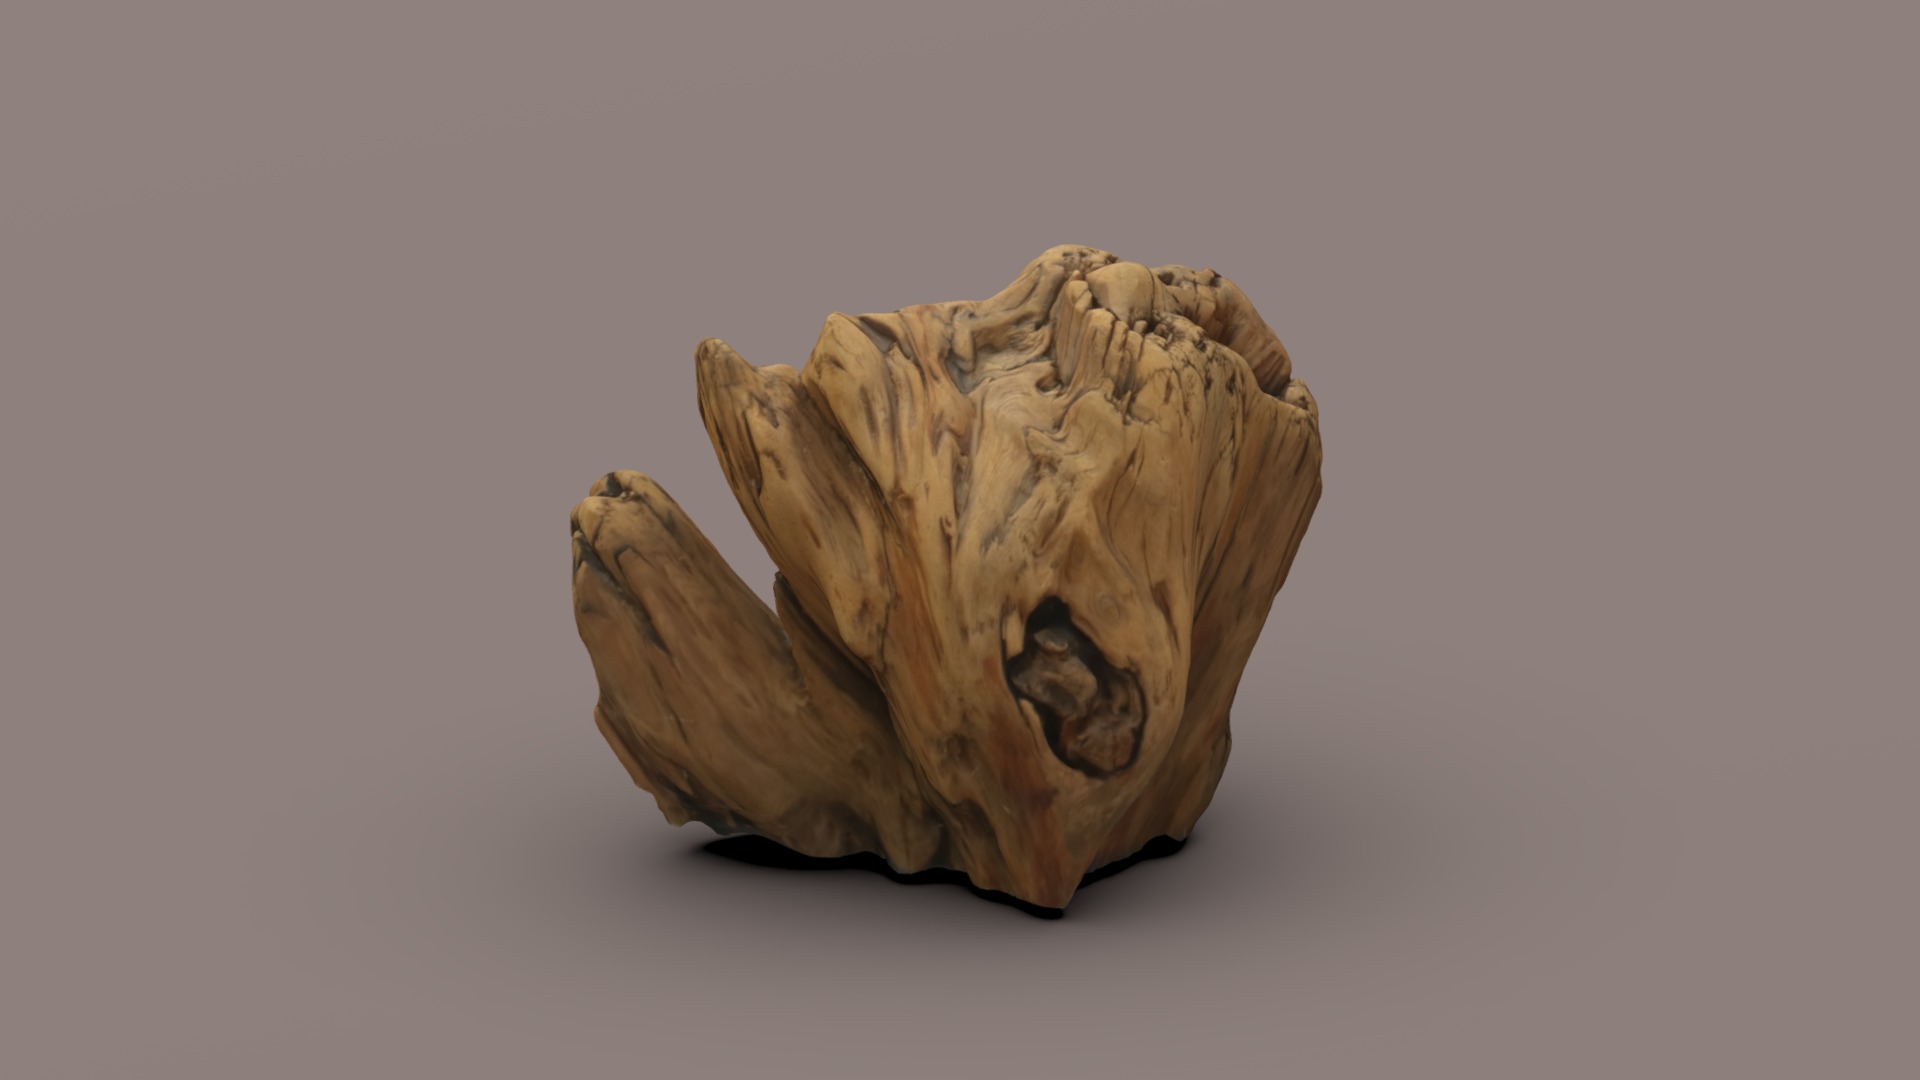 3D model Wood - This is a 3D model of the Wood. The 3D model is about a stone sculpture of a head.